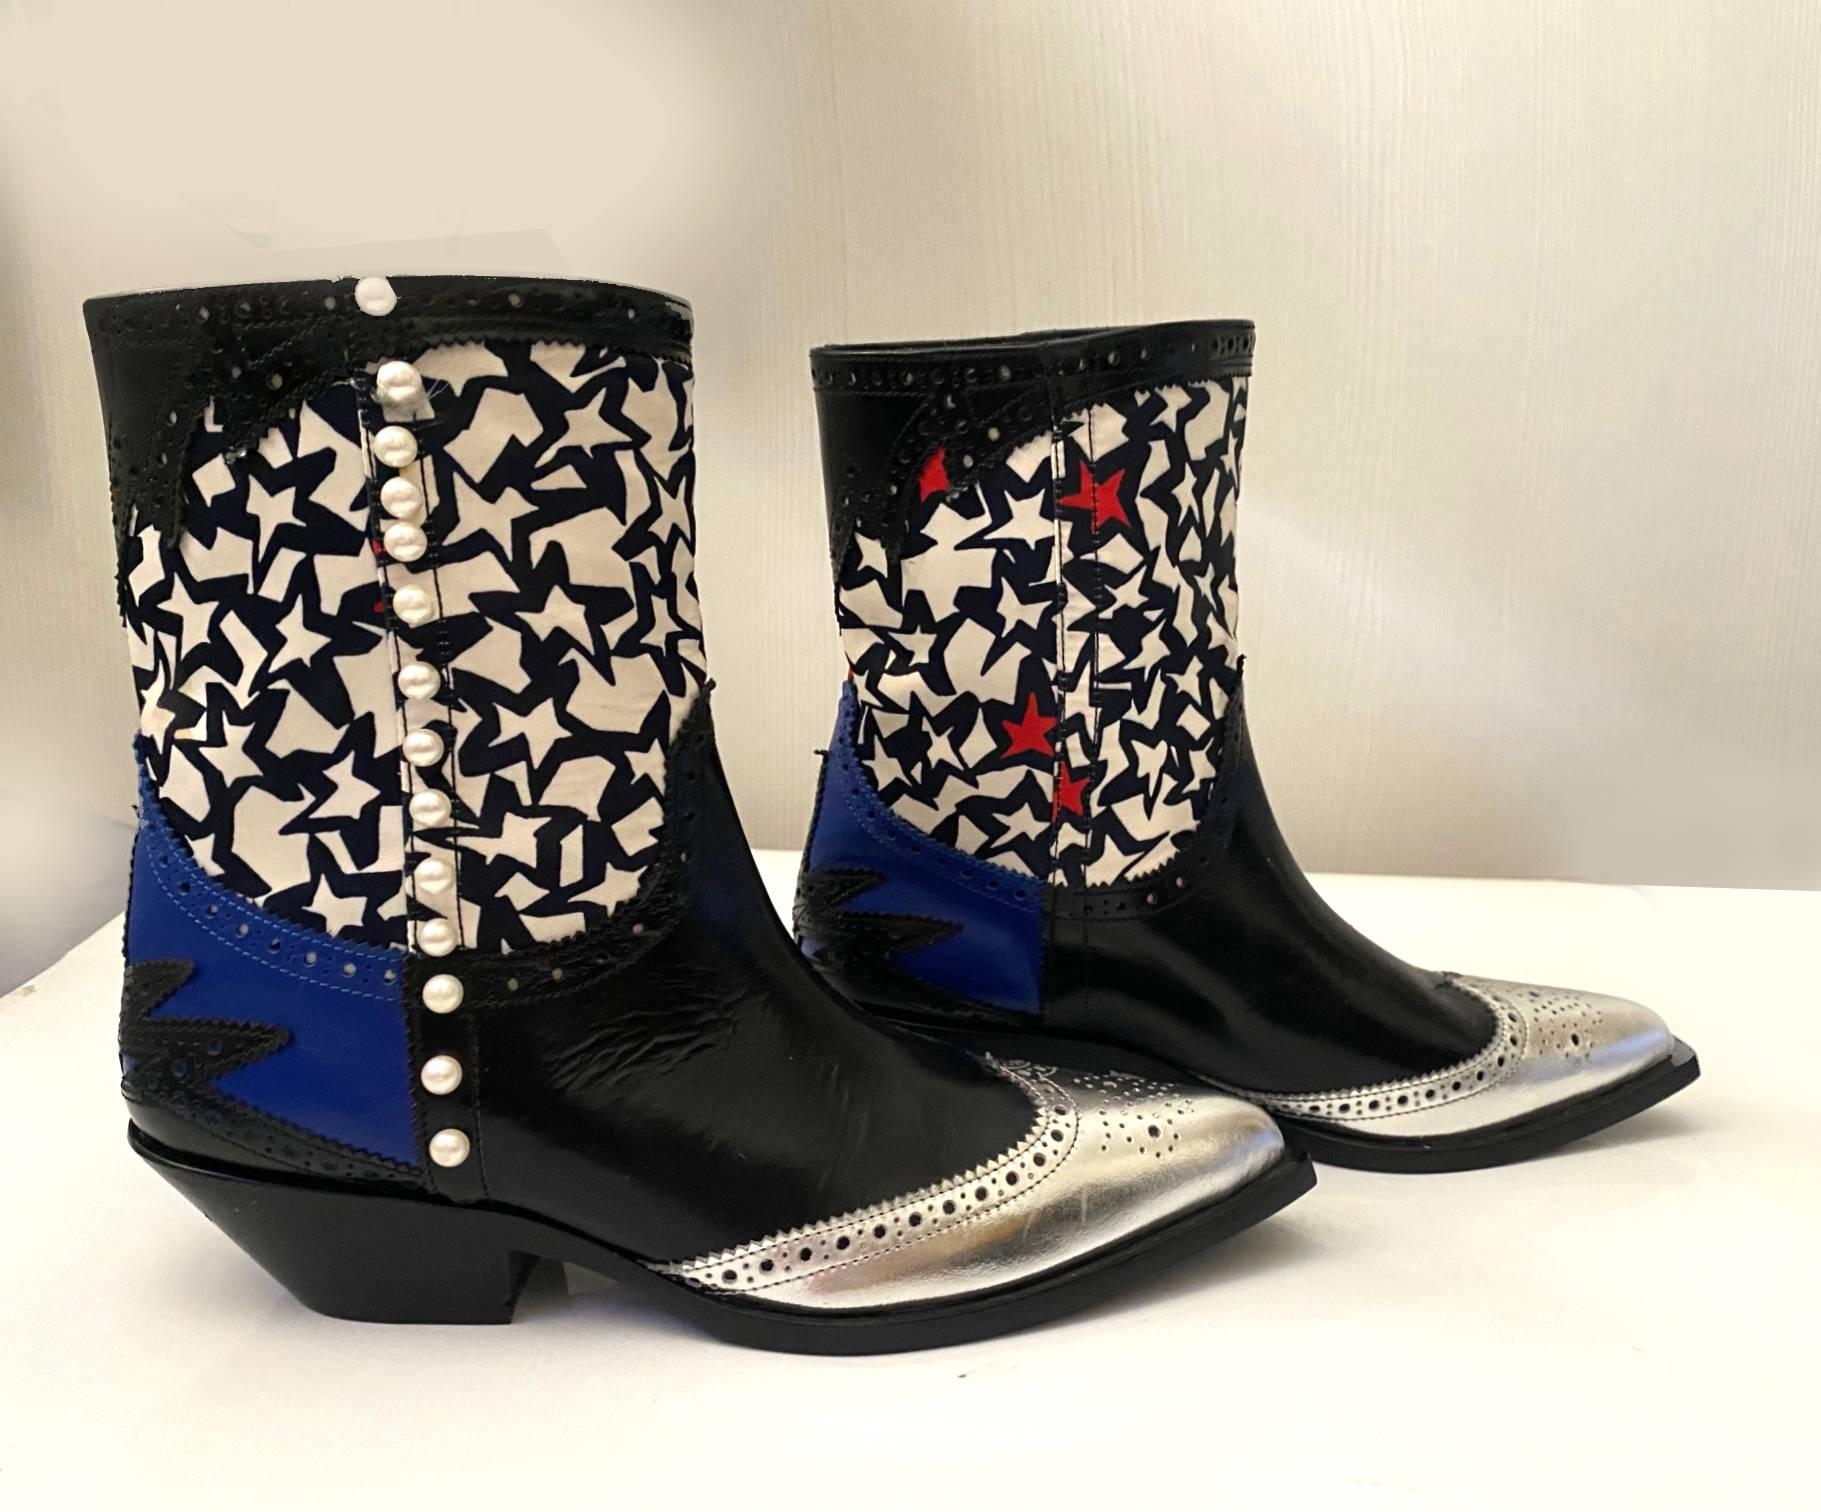 Massimo Giorgetti has cited one of his main creative inspirations as art, which infiltrates into his designs and is a defining factor in his modern collections. These leather western style boots from MSGM have many artistic features including: